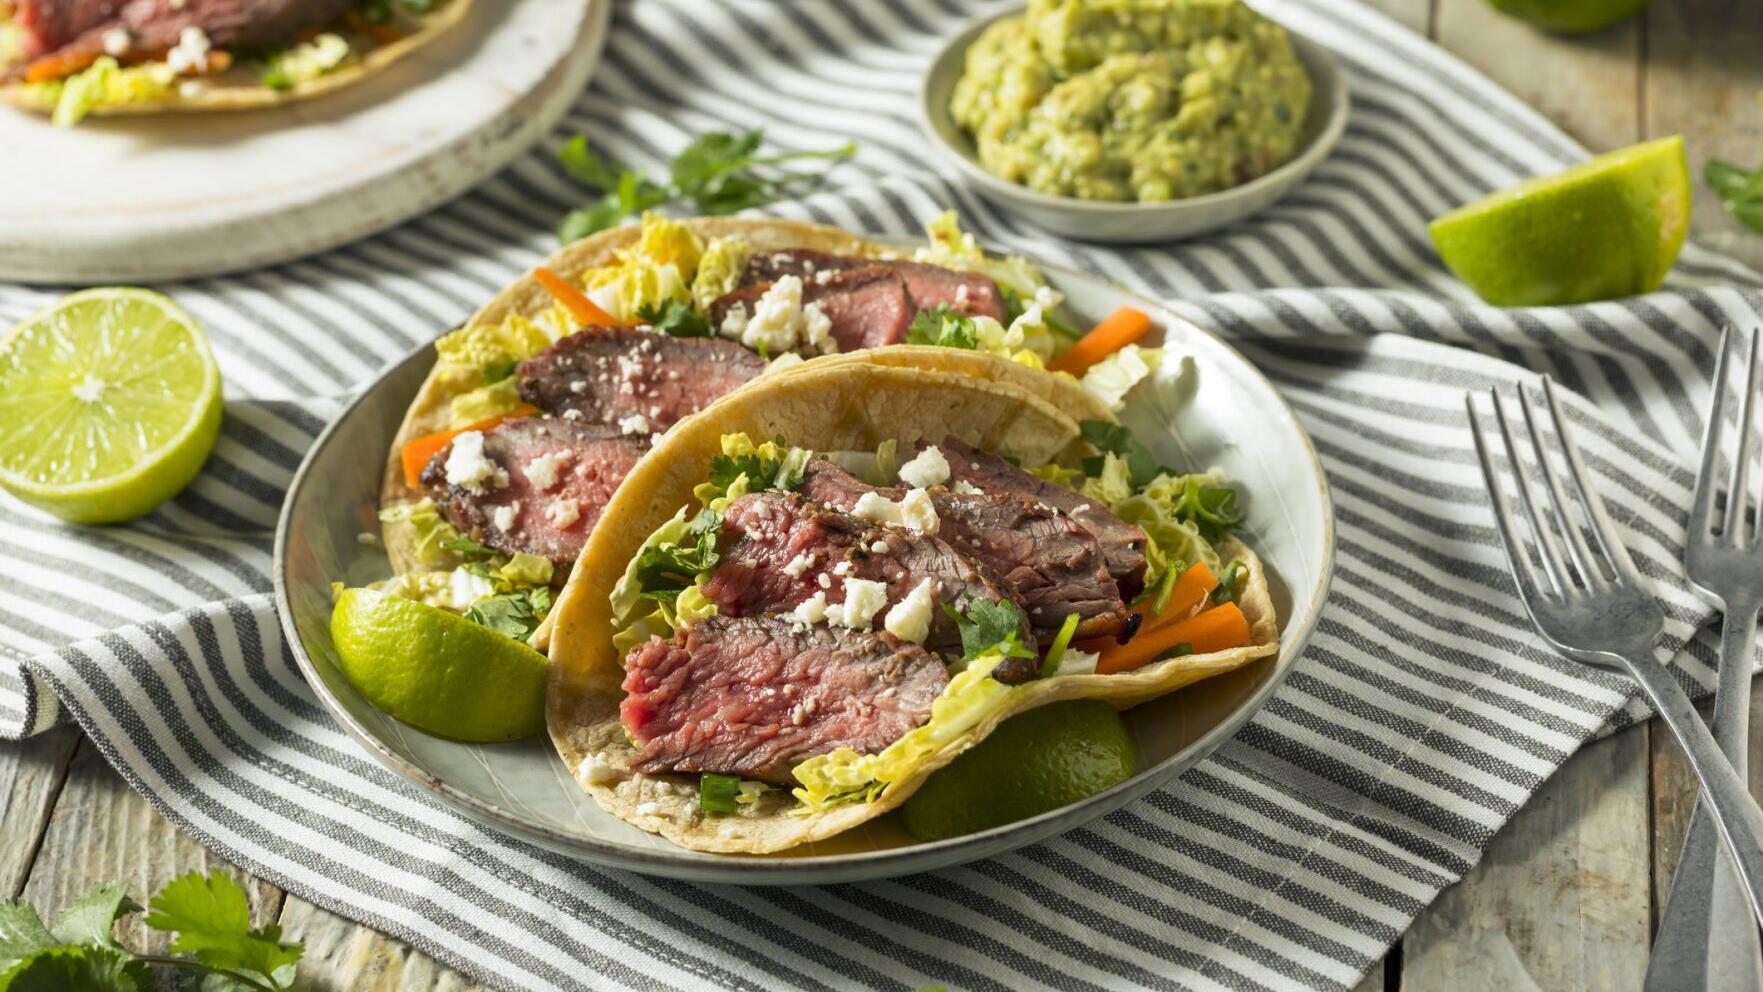 Seriously Simple: These grilled steak tacos are perfect for a cookout